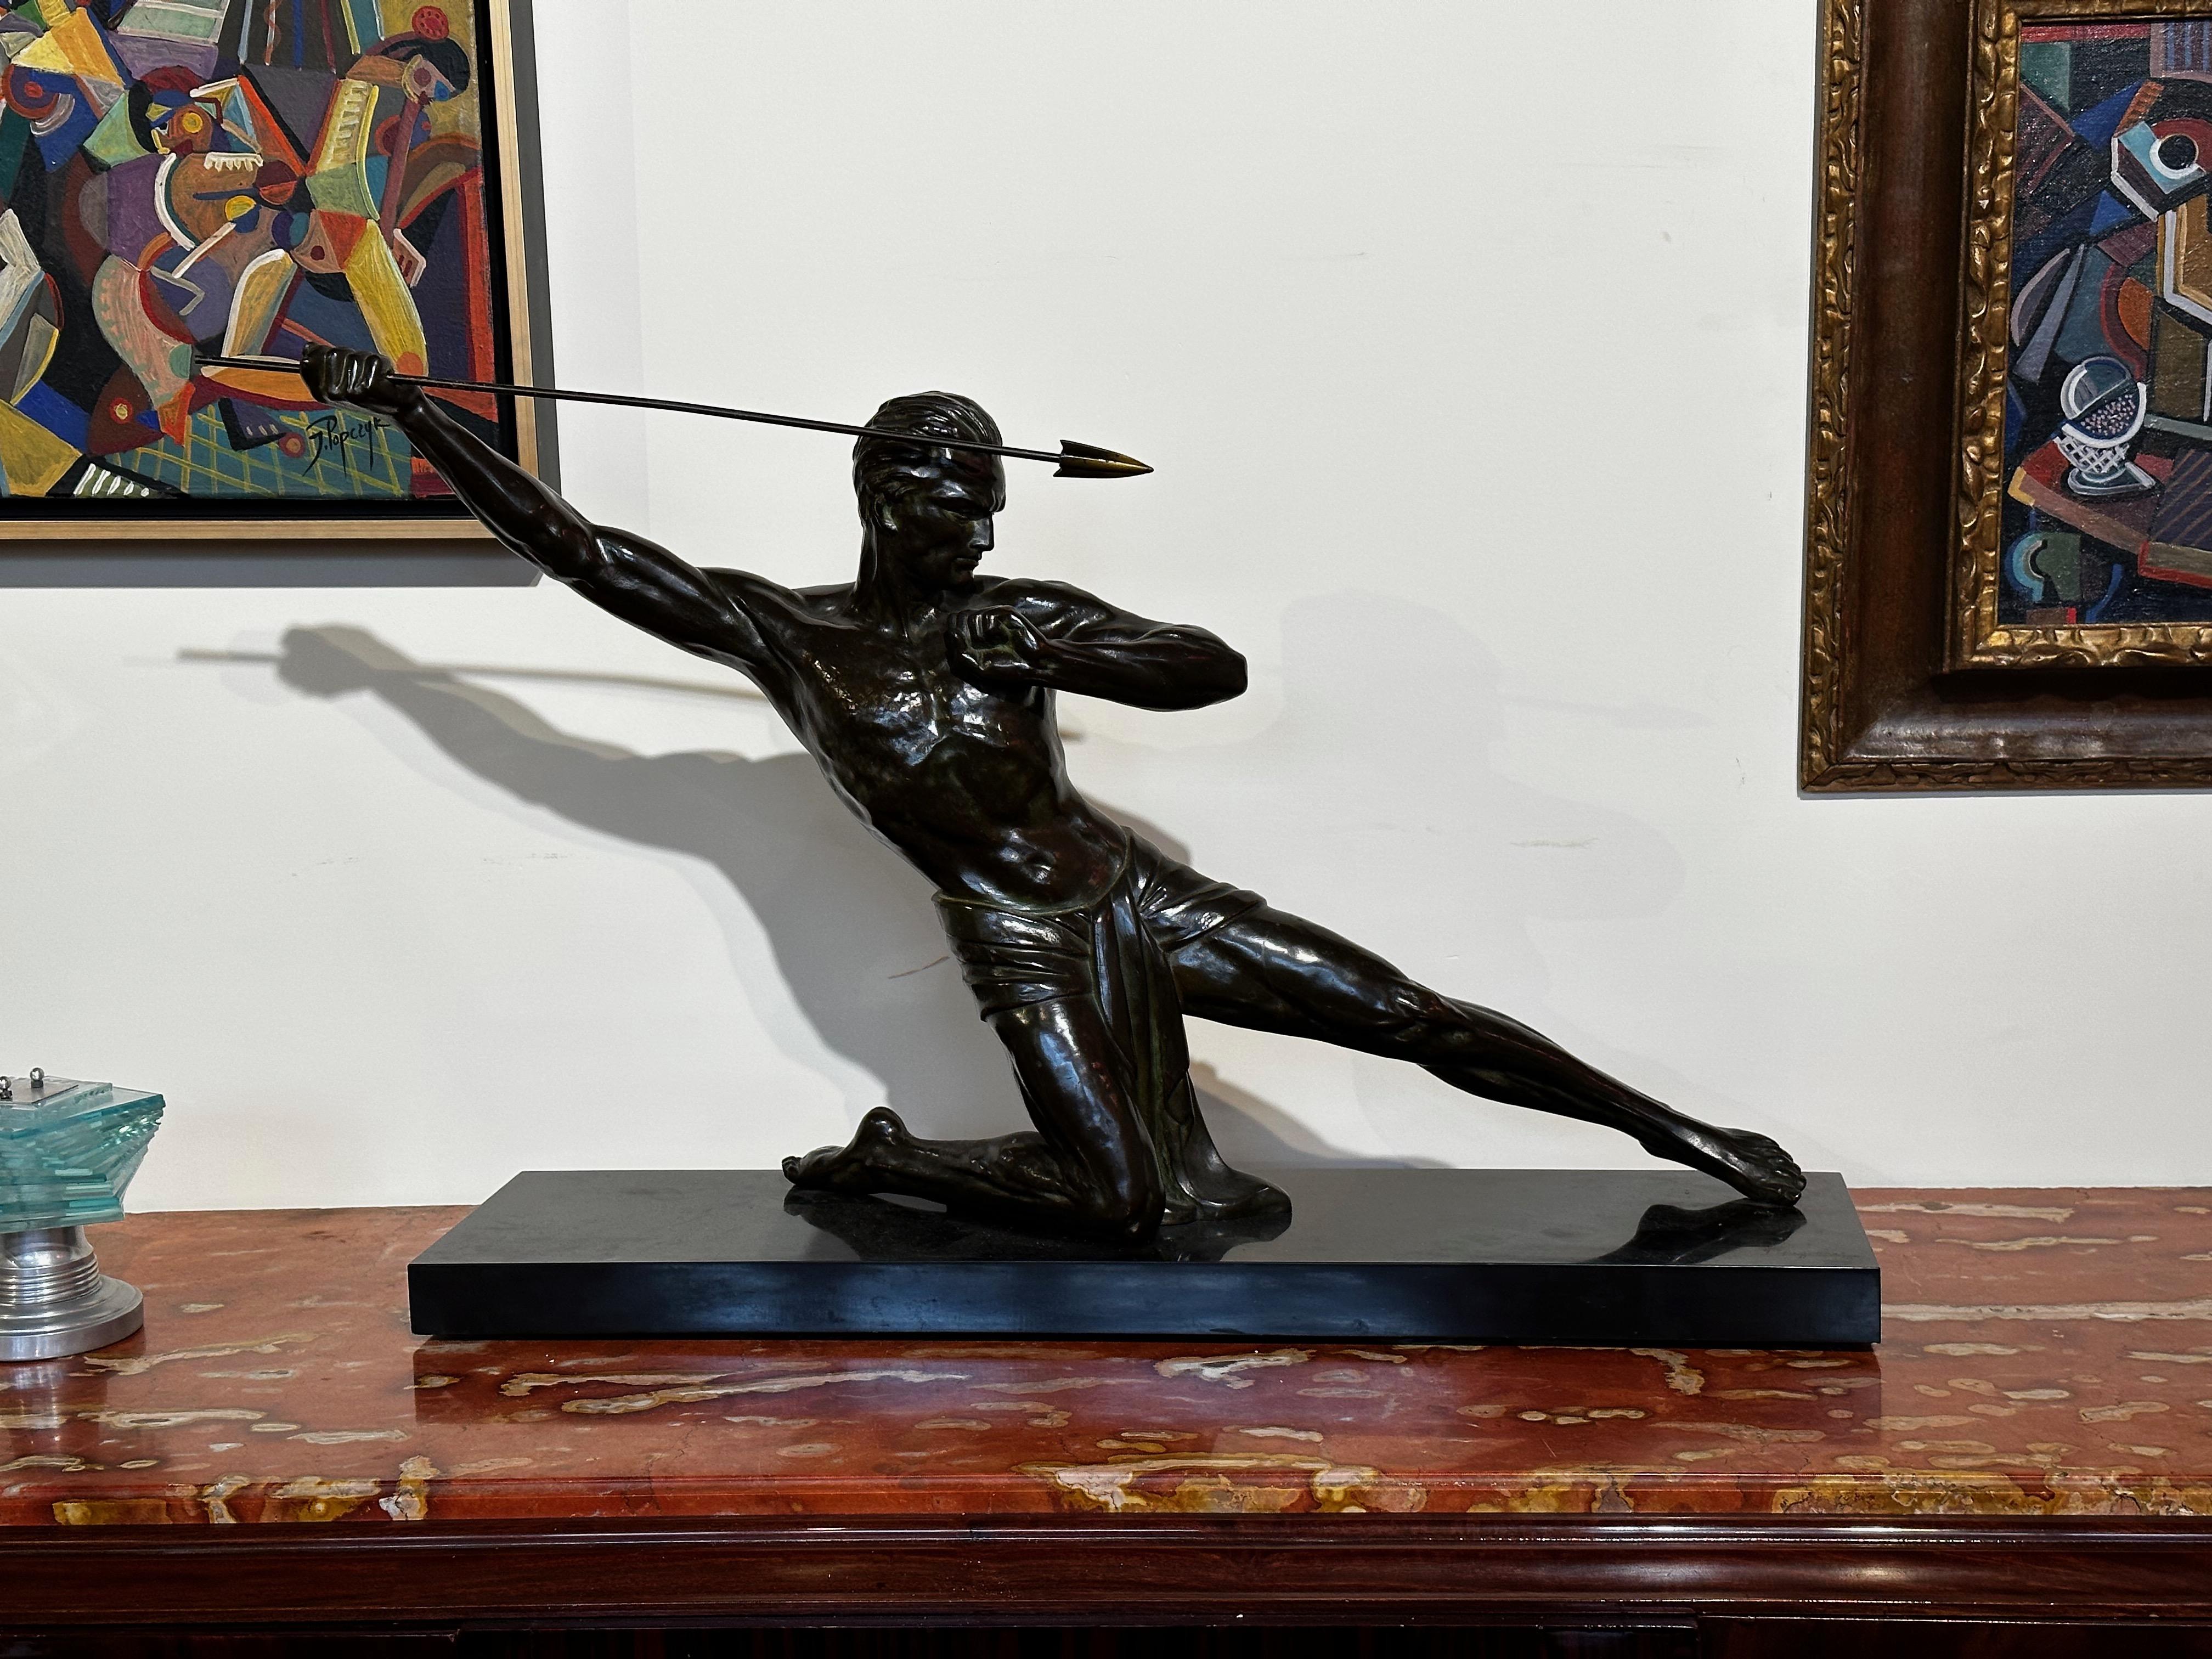 Large original bronze by P. Hugonnet signed on the marble, it is depicting the classic javelin thrower. This is a very well-detailed and quite intense figure. Look at his face, his hands, his muscular formation. Many of these classic athletic poses